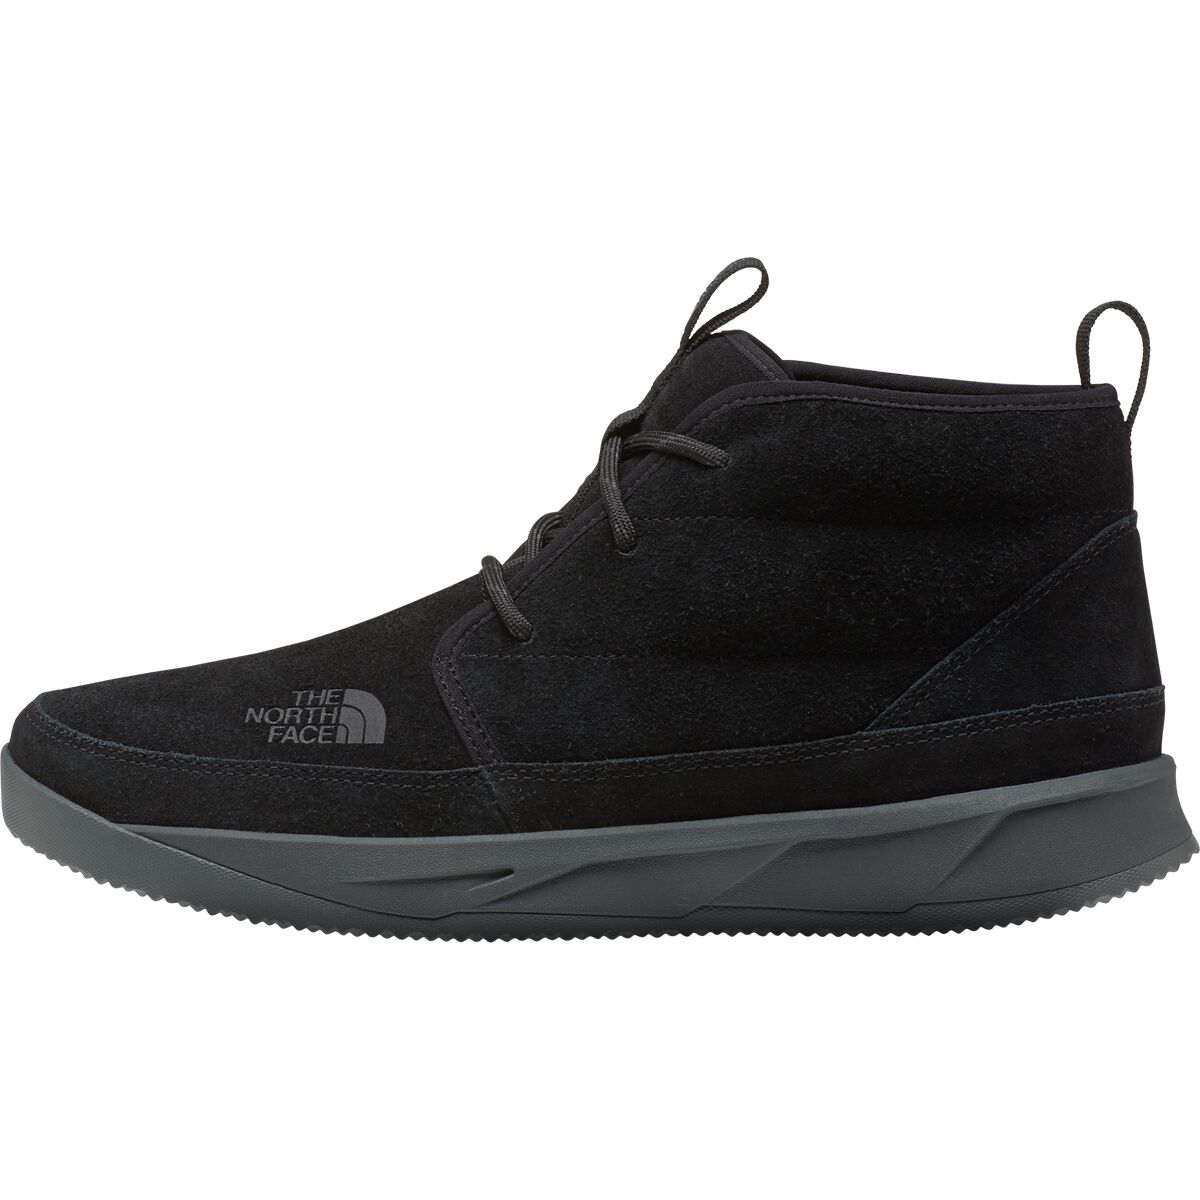 The North Face NSE Chukka Suede Shoe - Men's